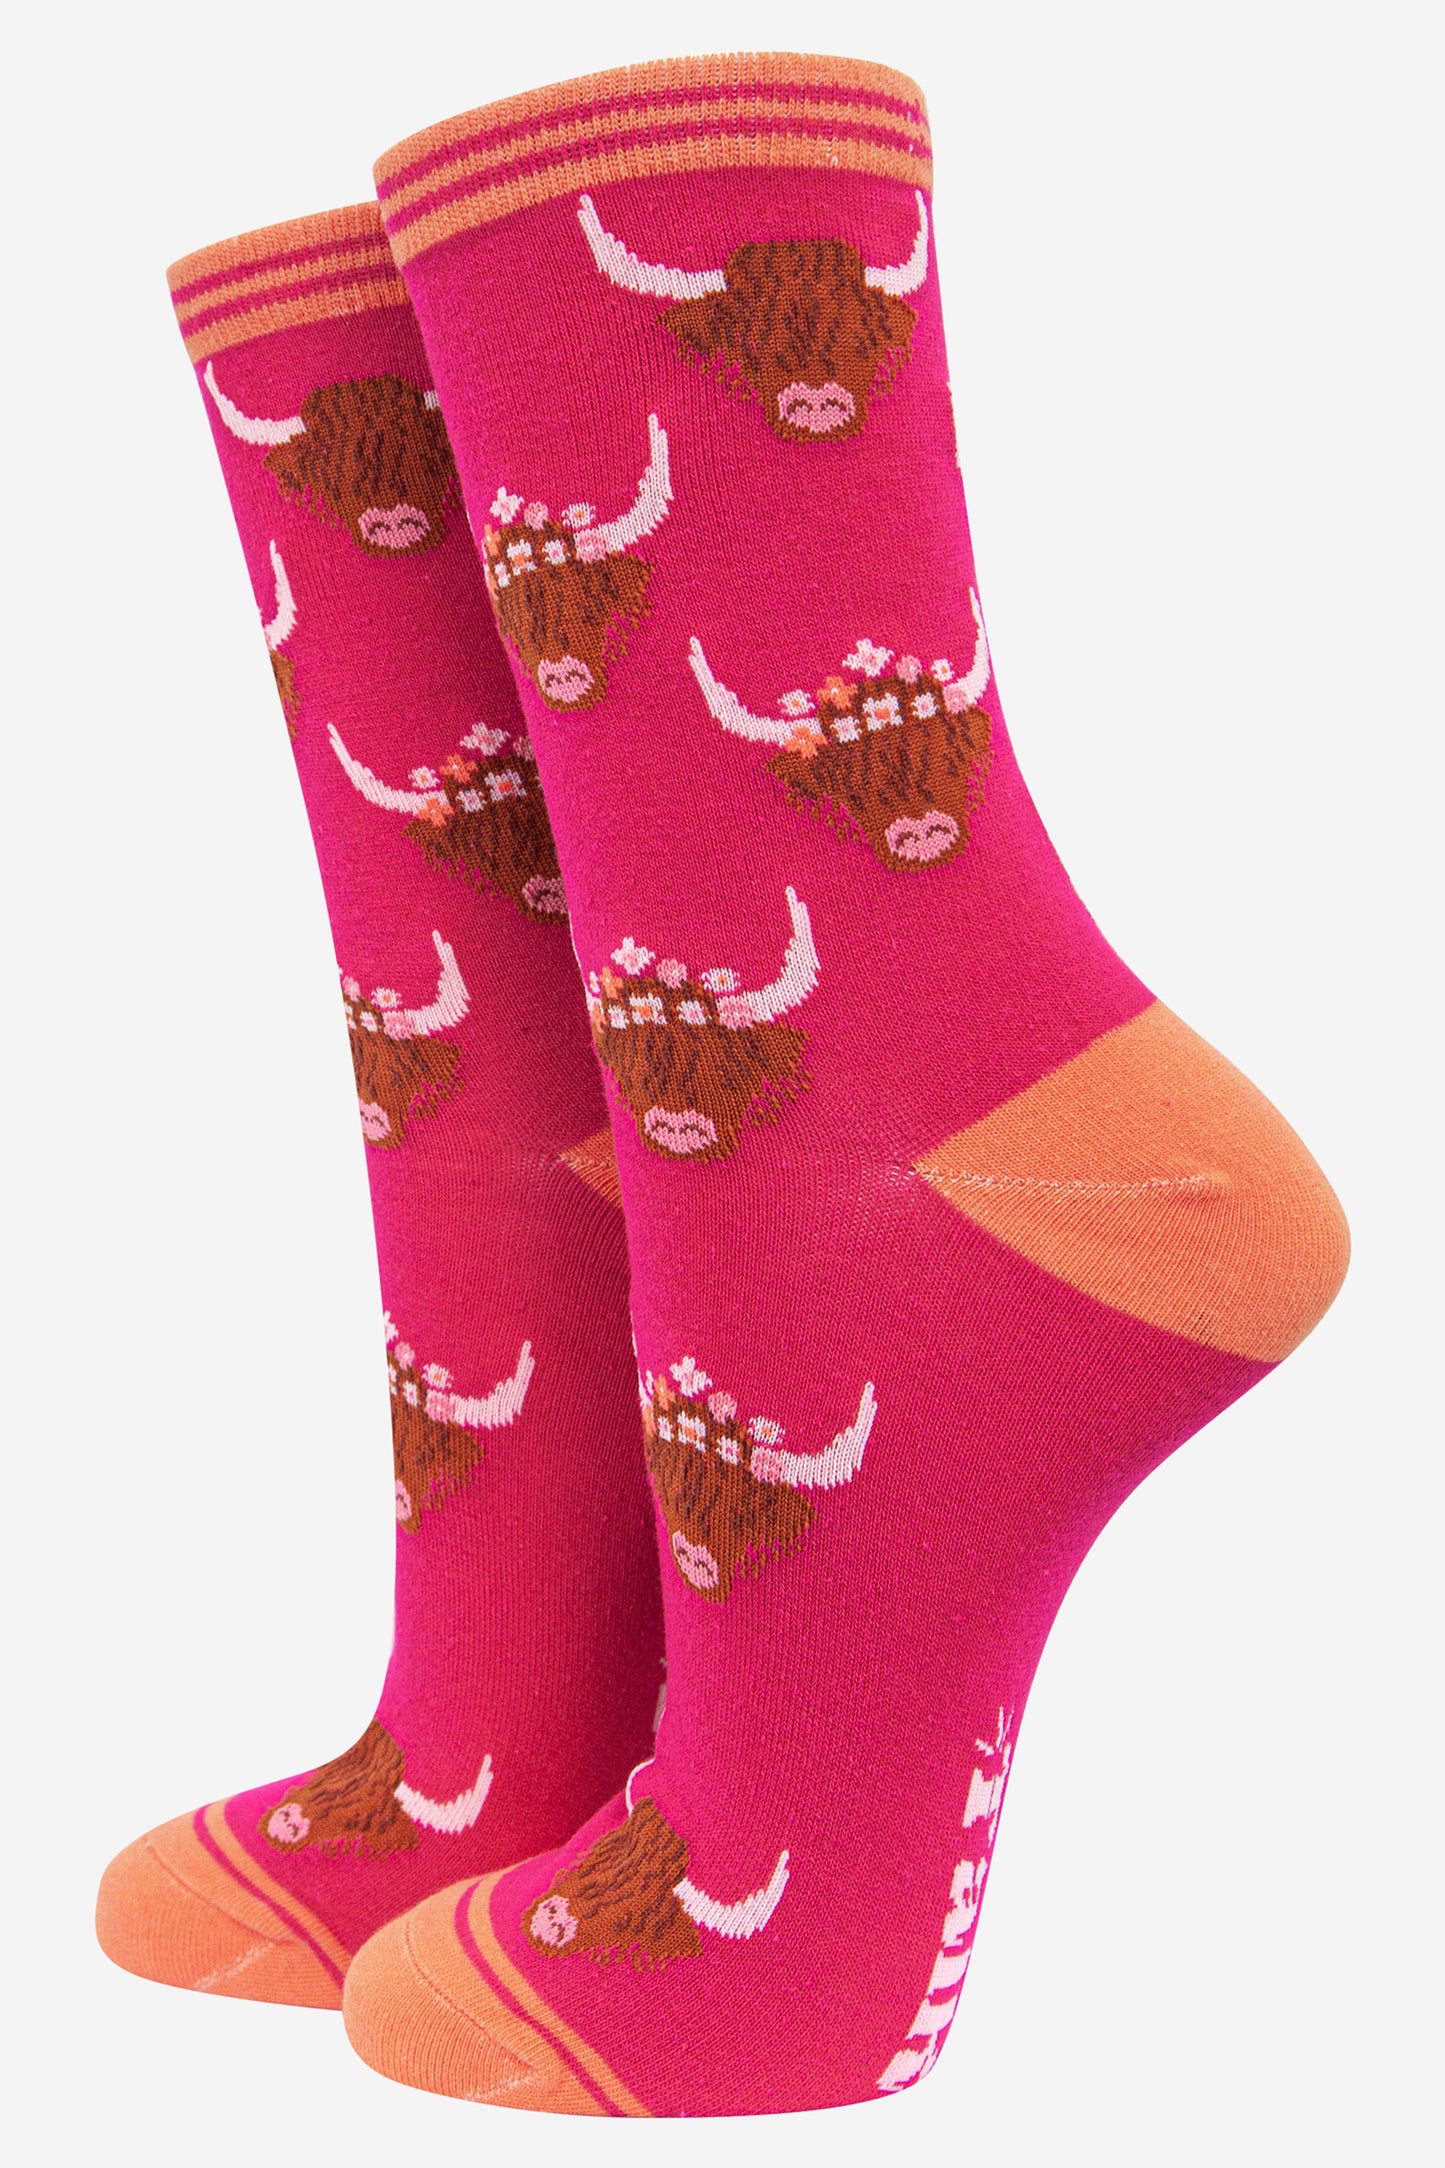 a bright pink ankle sock with a pattern of brown highland cow faces wearing floral crowns all over.